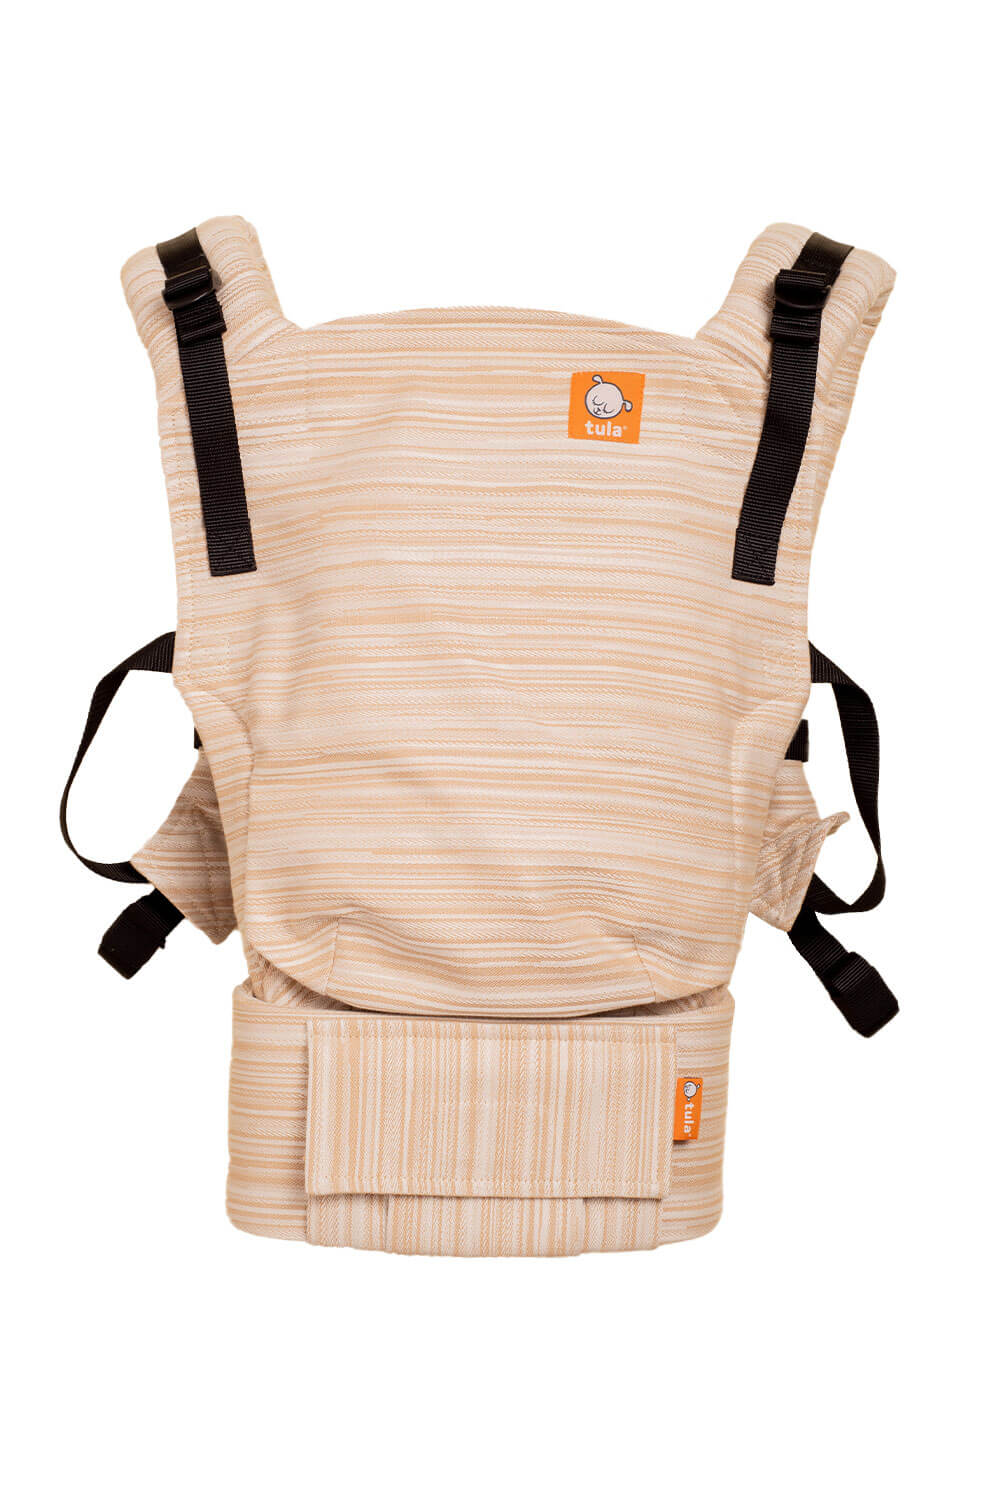 Matrix Sunkissed - Signature Woven Free-to-Grow Baby Carrier